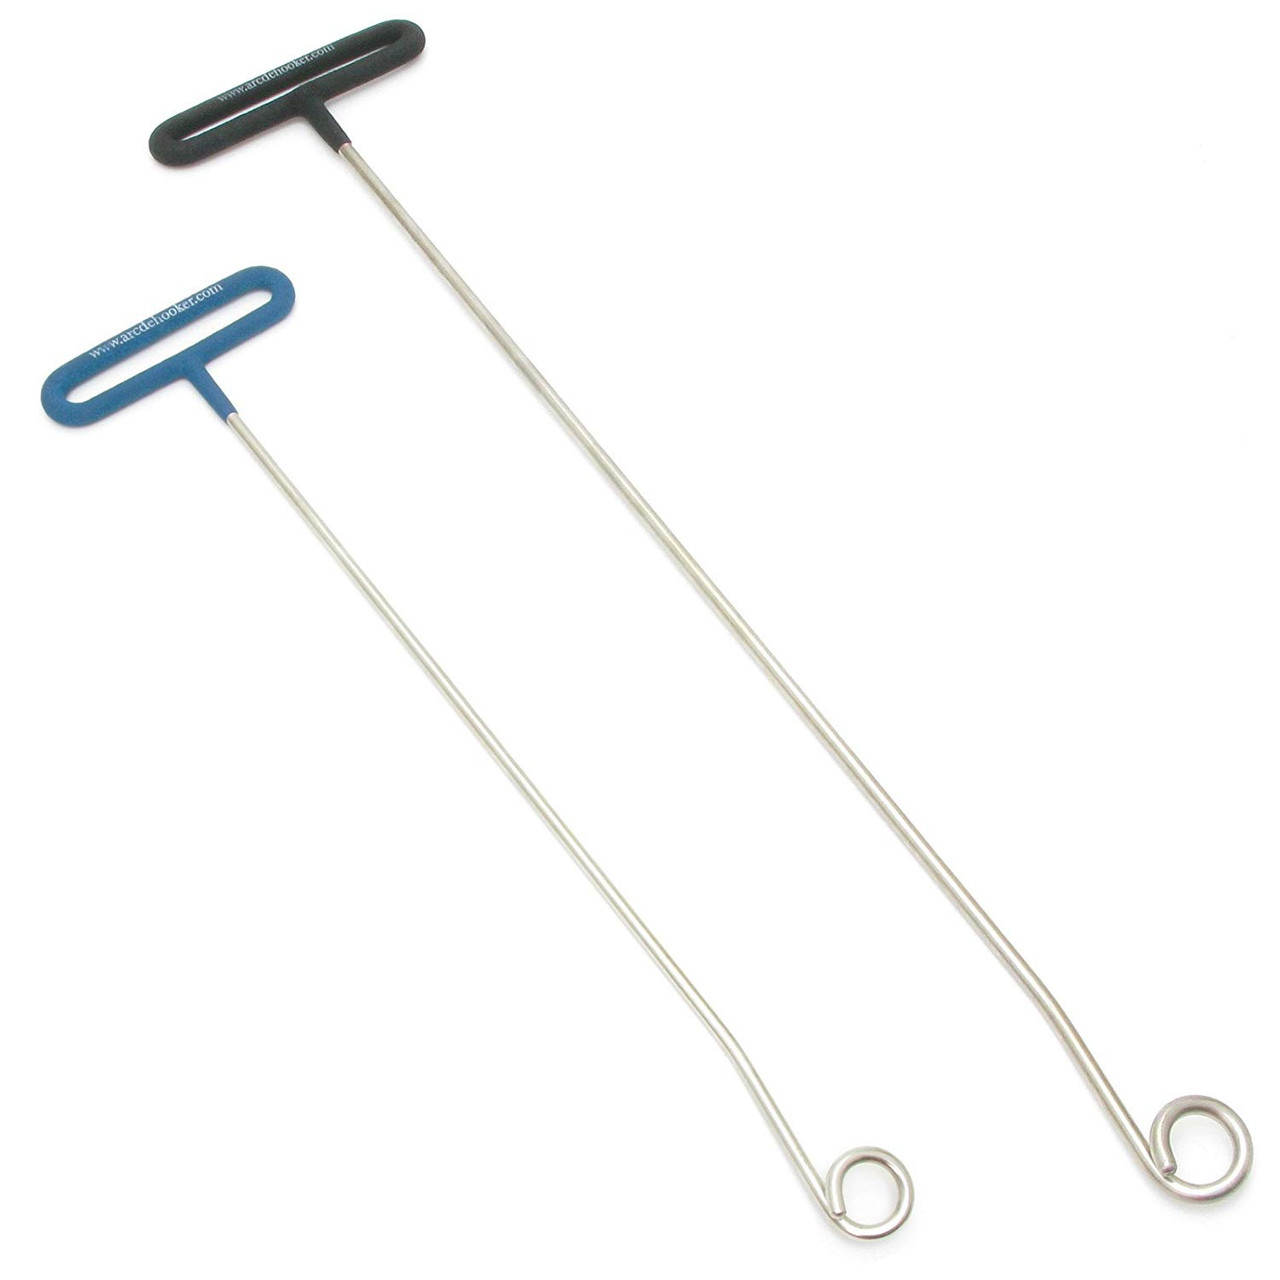 Set of 2 ARC Hook Remover DeHooker Sportsman 16 inch AND Game 24 inch